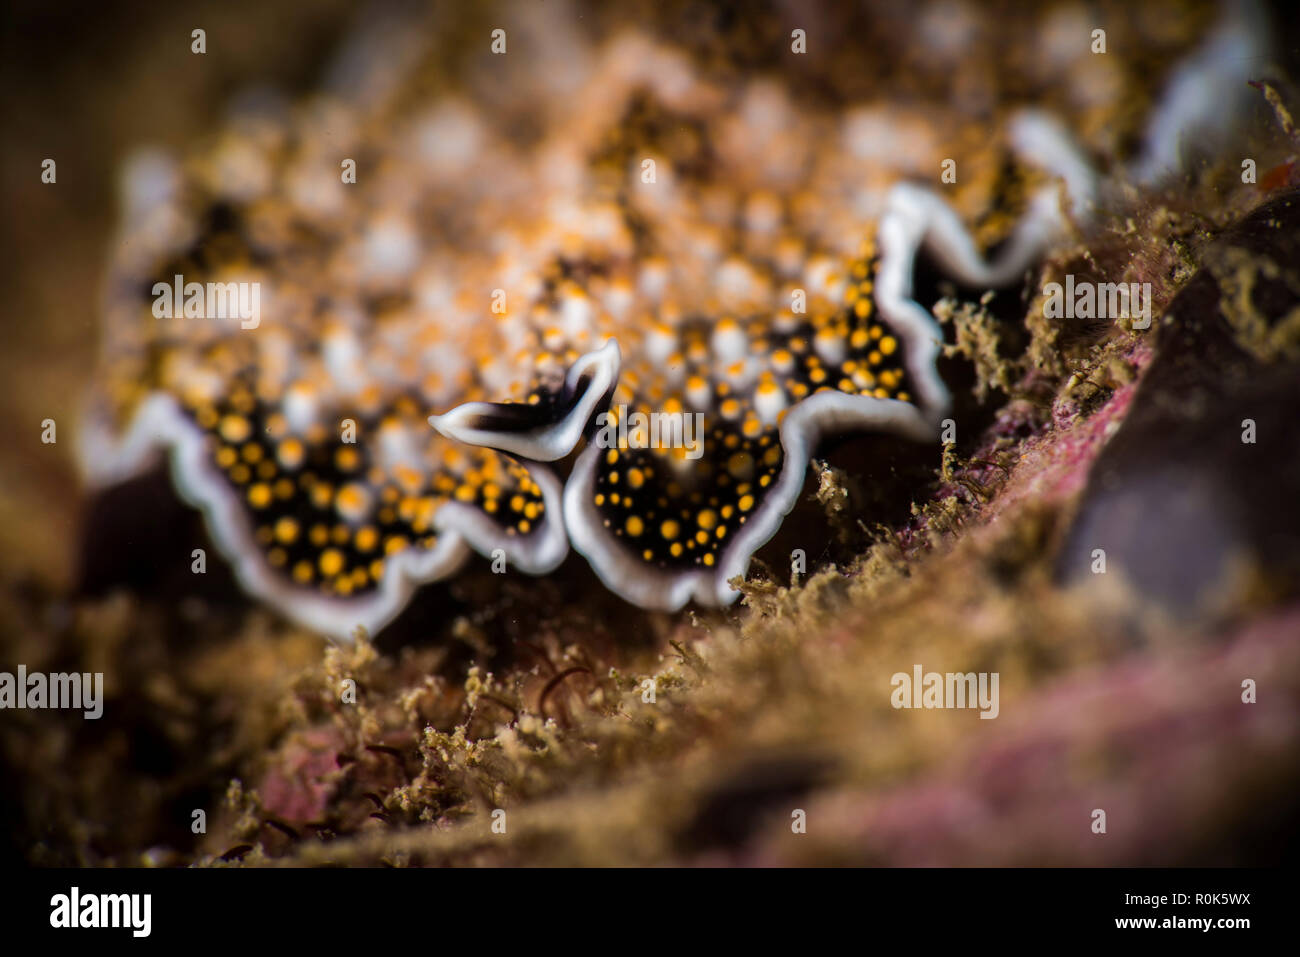 A polyclad flatworm makes its way over a coral reef. Stock Photo